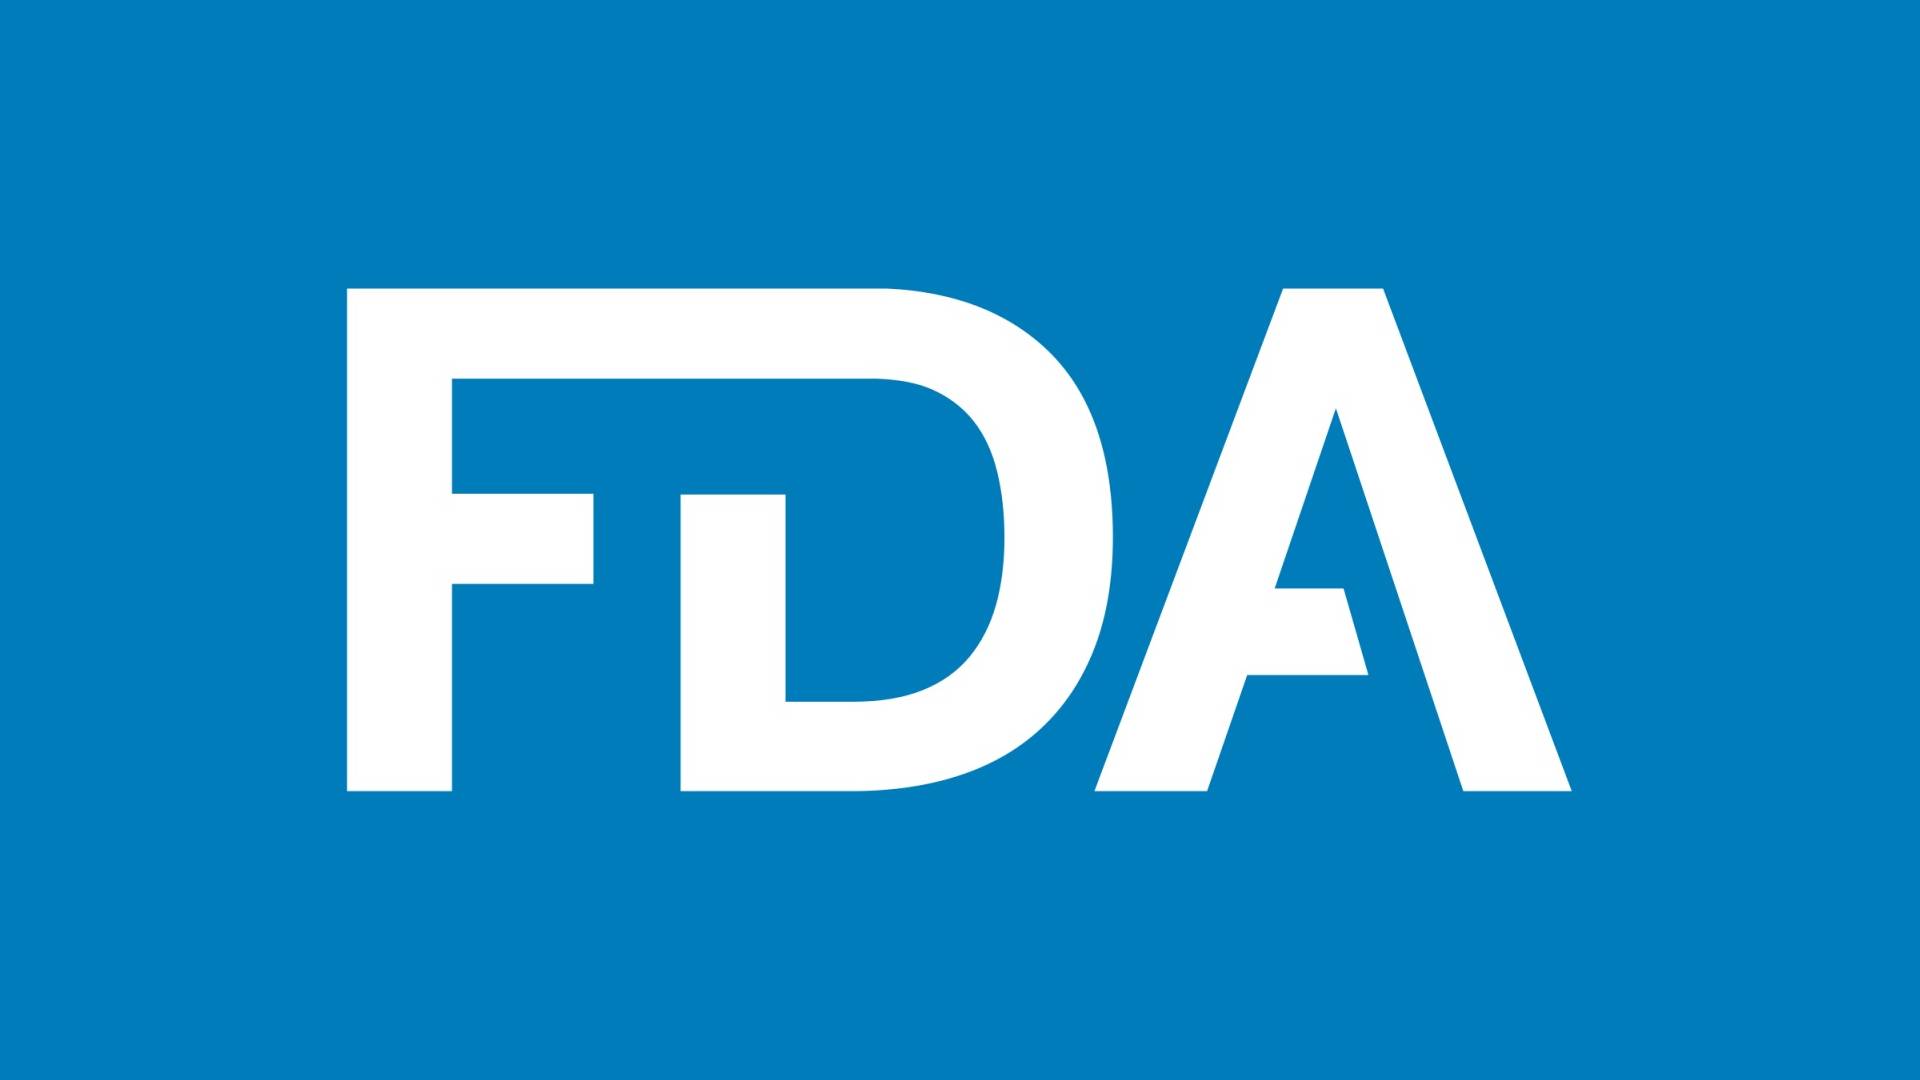 Health News Roundup: Bi-weekly dose of Johnson & Johnson's blood cancer therapy gets US FDA approval; Teva Pharm to stay as unified drugmaker, sees big interest in API business, says CEO and more 